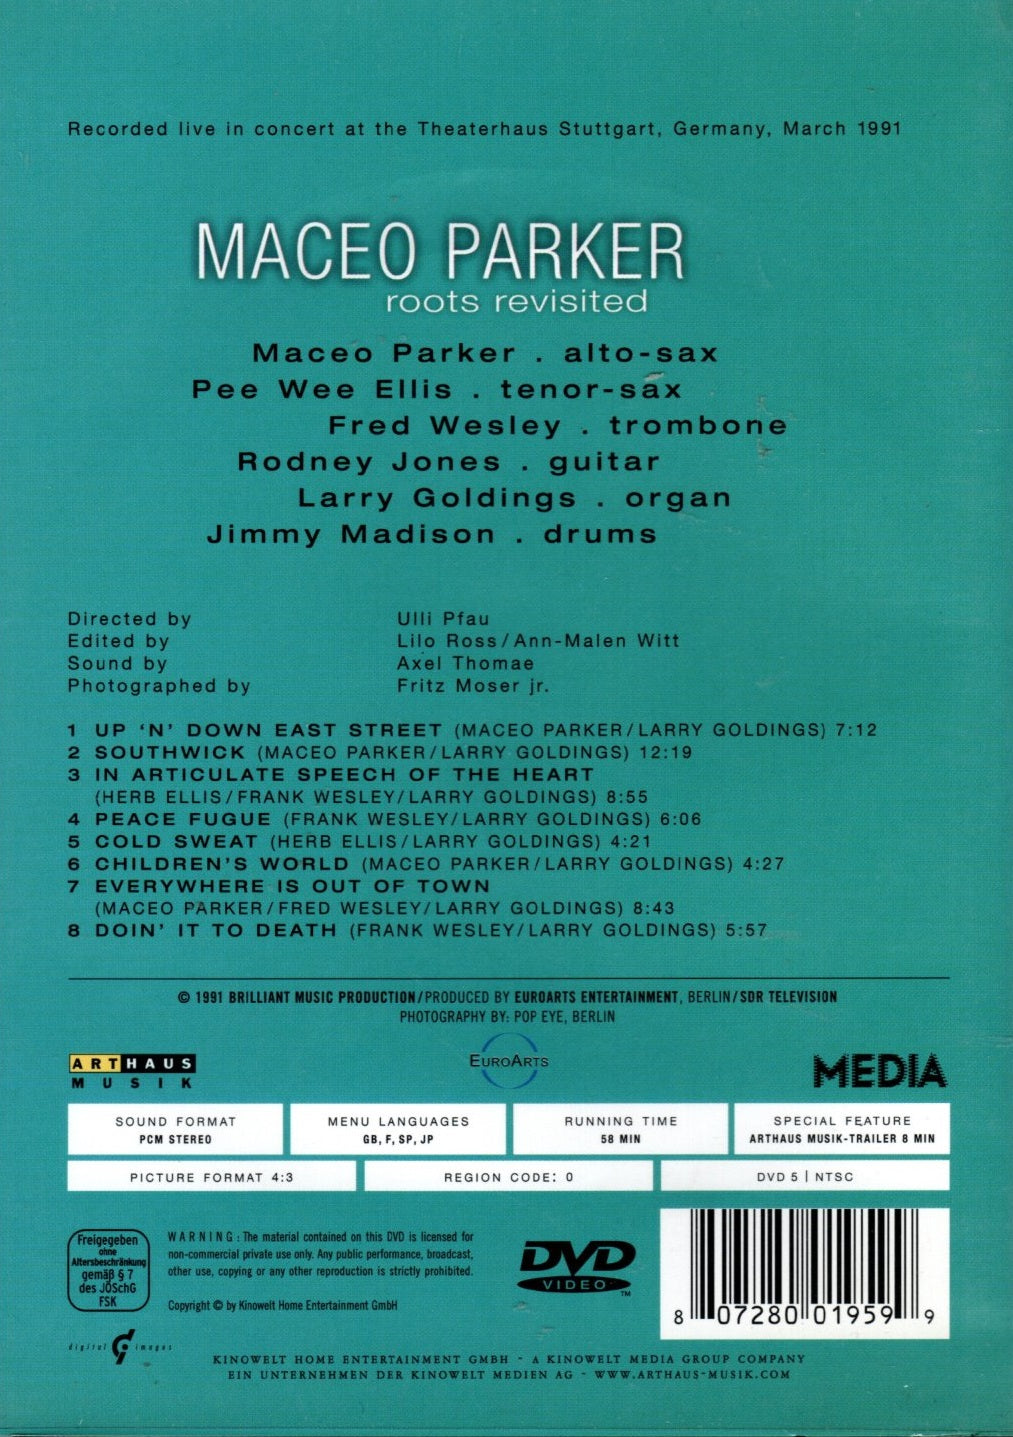 DVD Maceo Parker: Roots Revisited